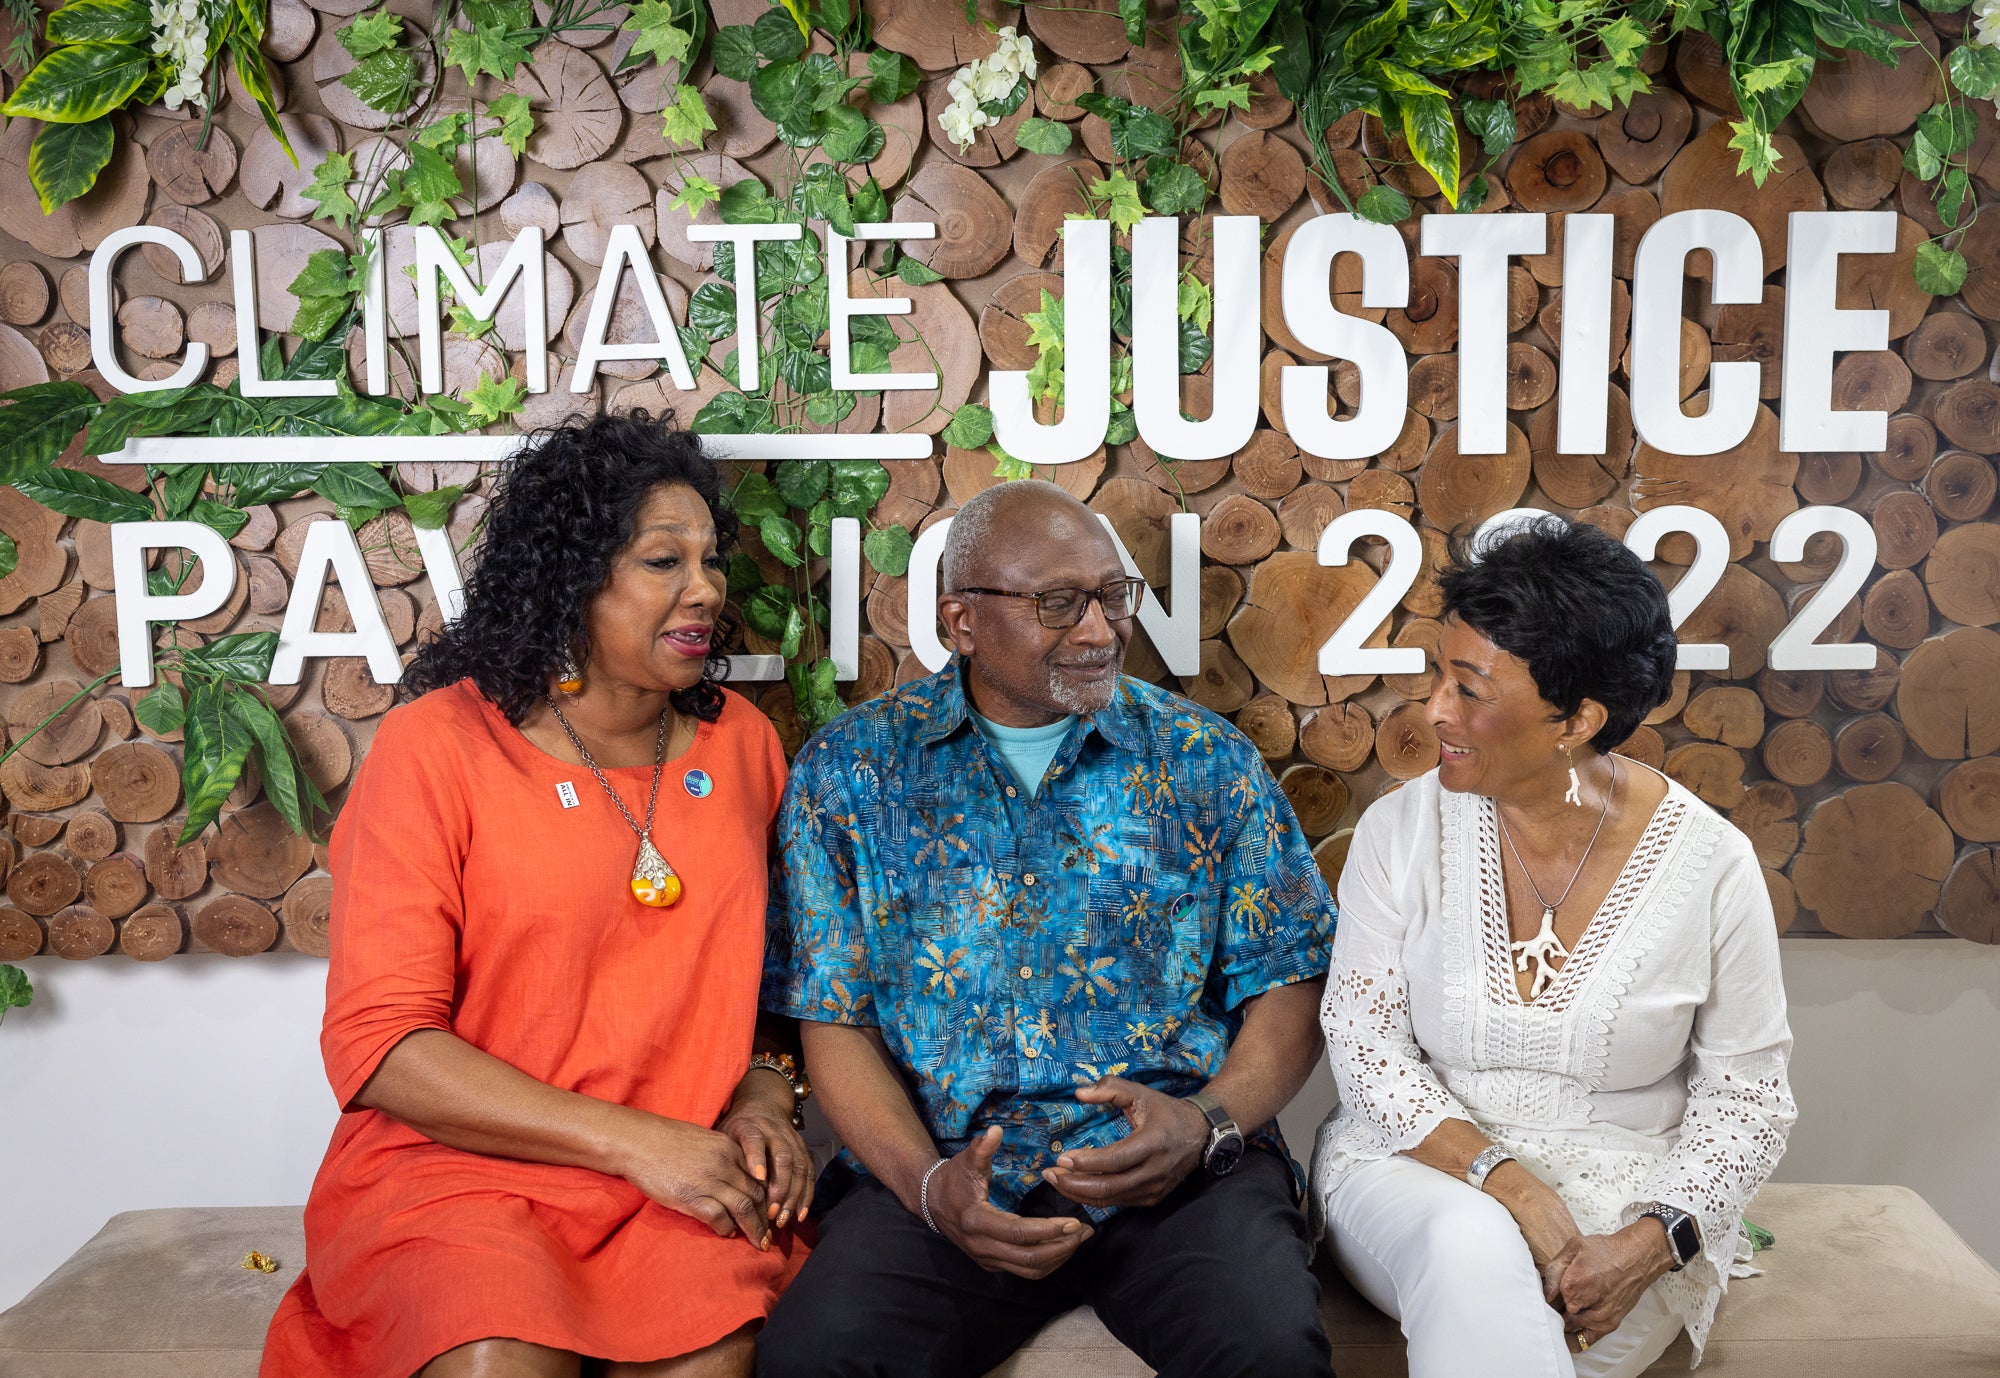 The founders and leaders of the organizations that created the Climate Justice Pavilion, from left: Dr. Beverly Wright of the Deep South Center for Environmental Justice, Dr. Robert Bullard of the Bullard Center for Environmental Justice, and Peggy Shepard of WE ACT for Environmental Justice.